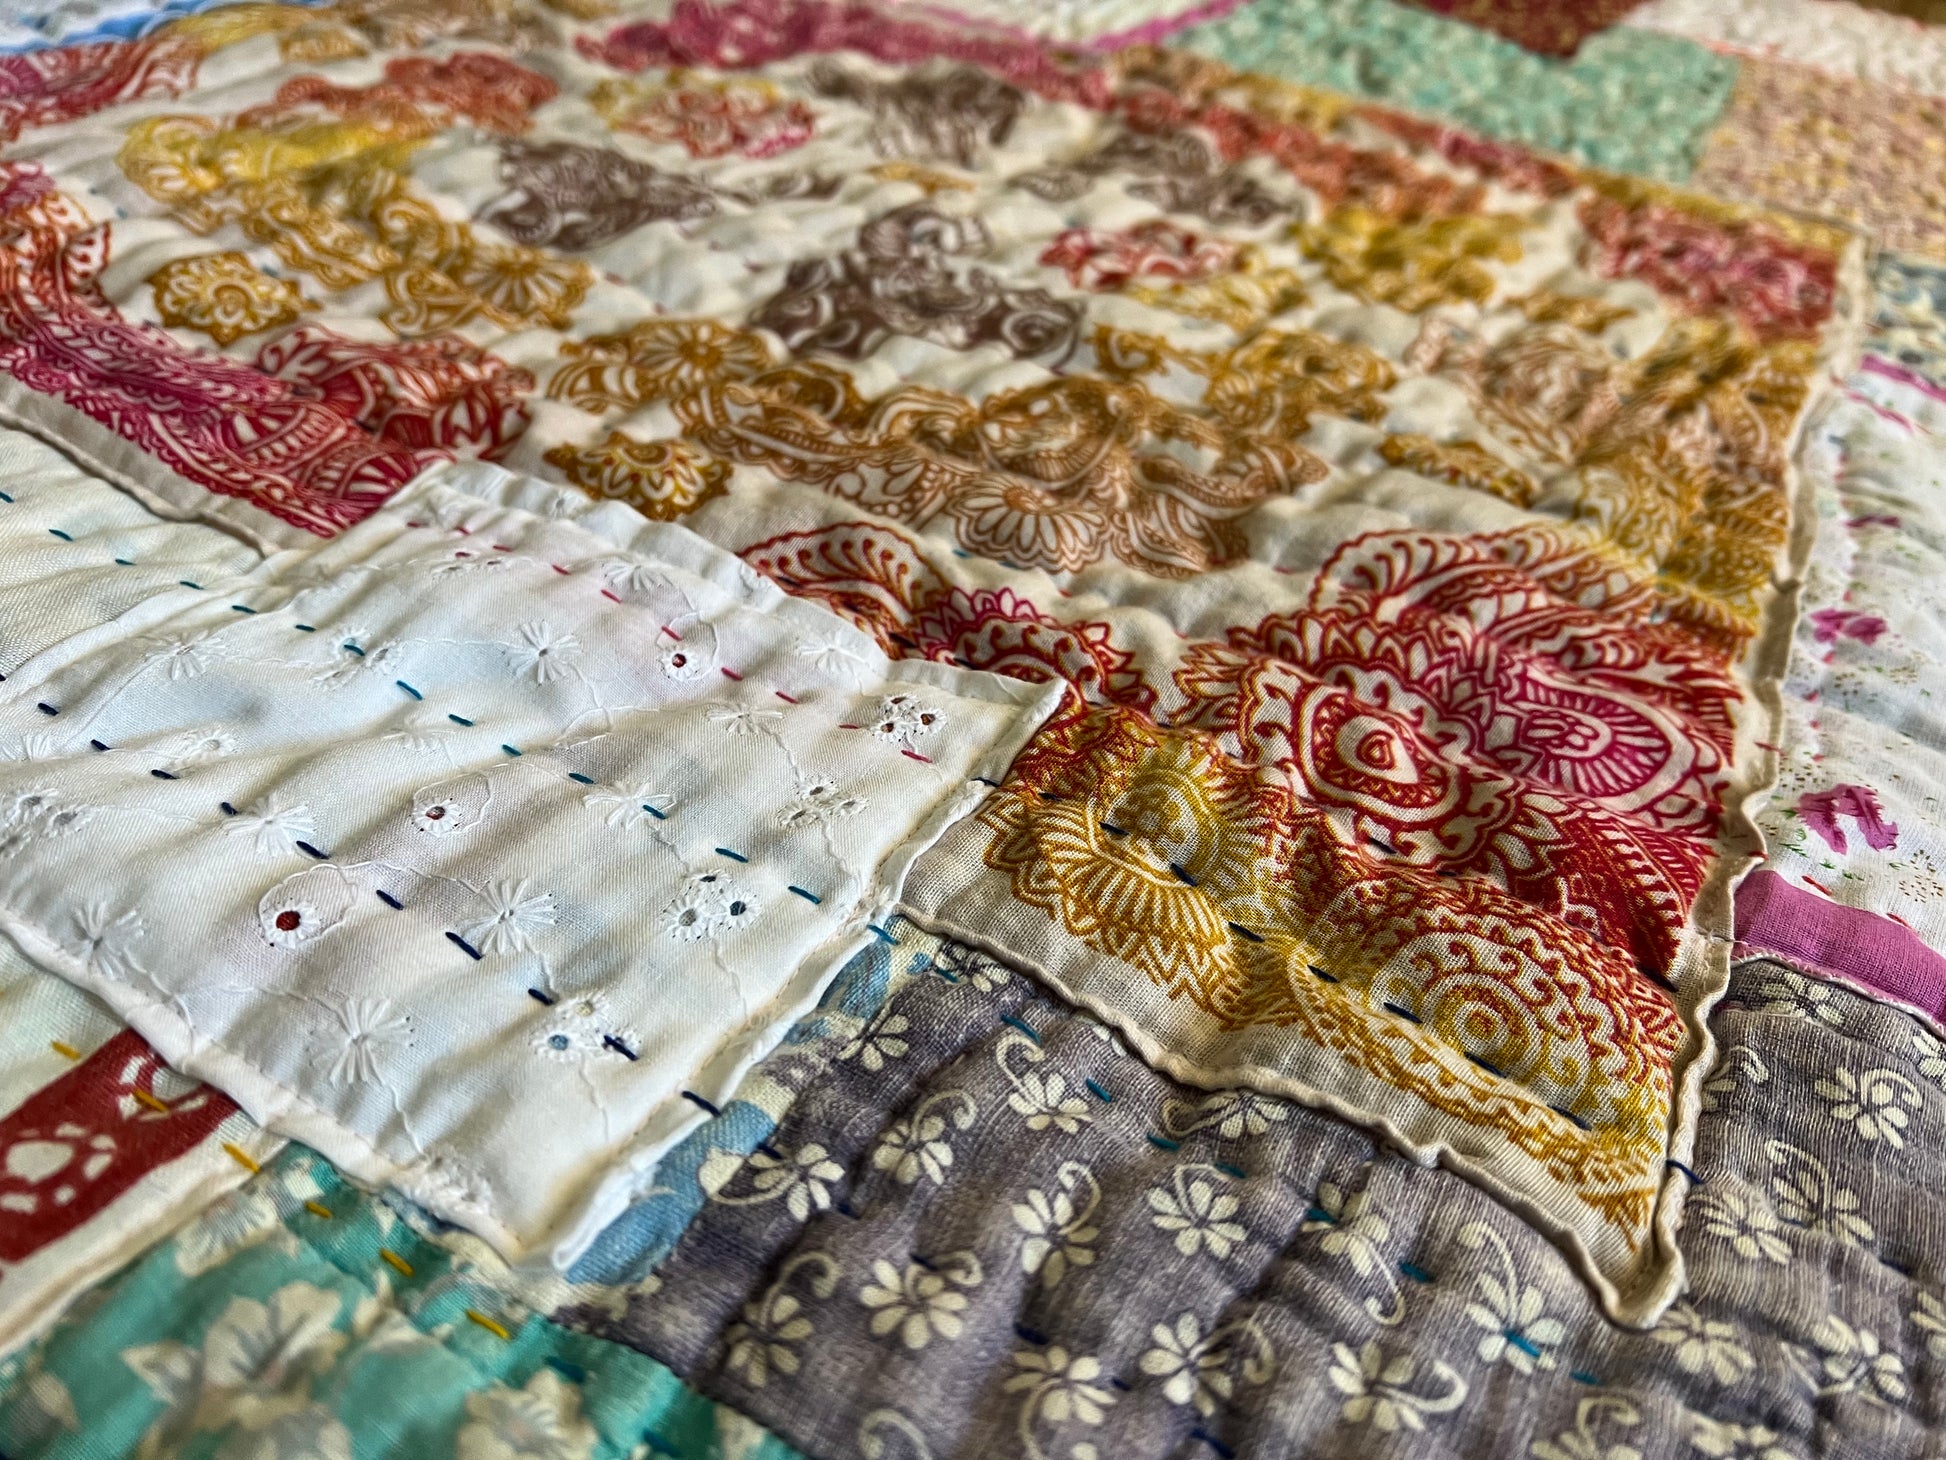 extra closeup view of the quilt, with hand-stitching. Handkerchiefs have been layered on top of damaged portions of the very old quilt